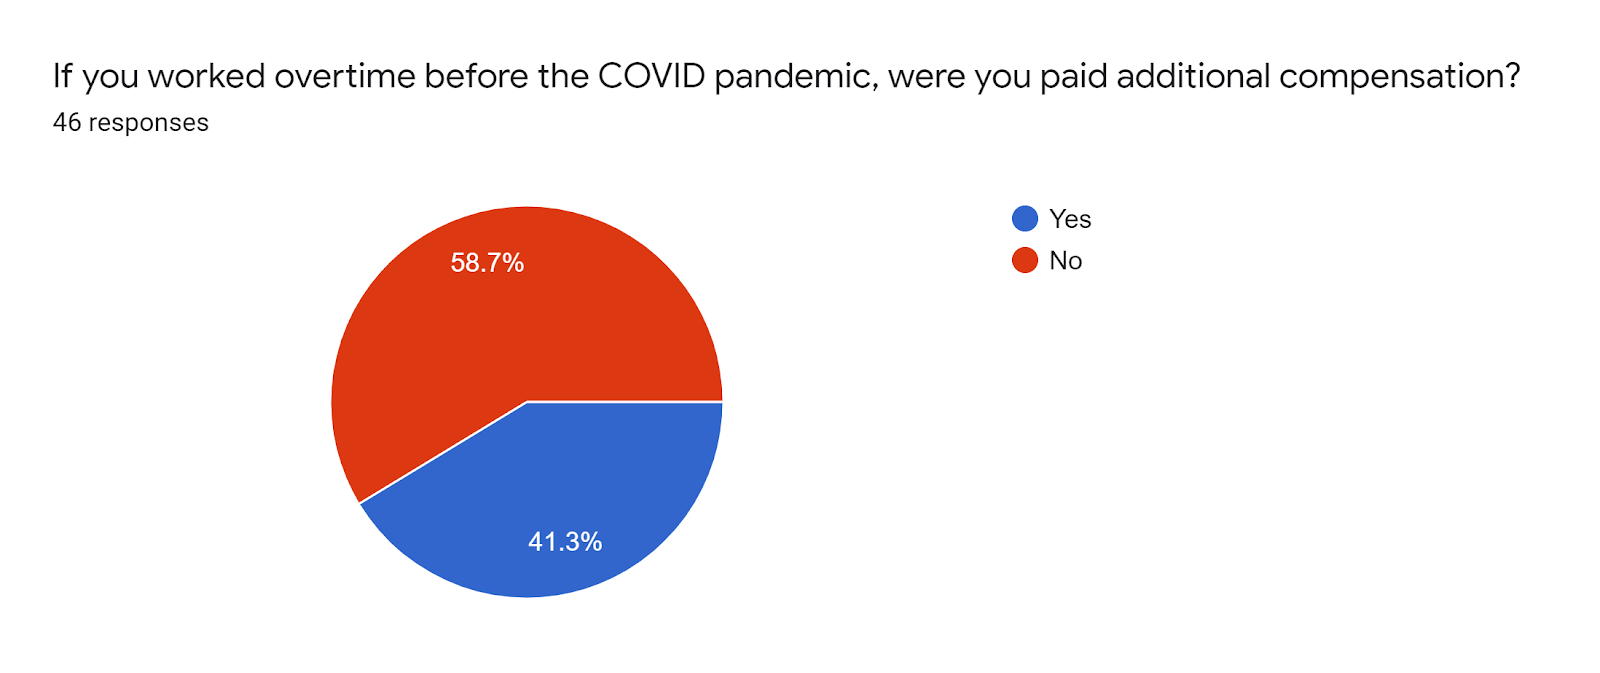 Forms response chart. Question title: If you worked overtime before the COVID pandemic, were you paid additional compensation?. Number of responses: 46 responses.